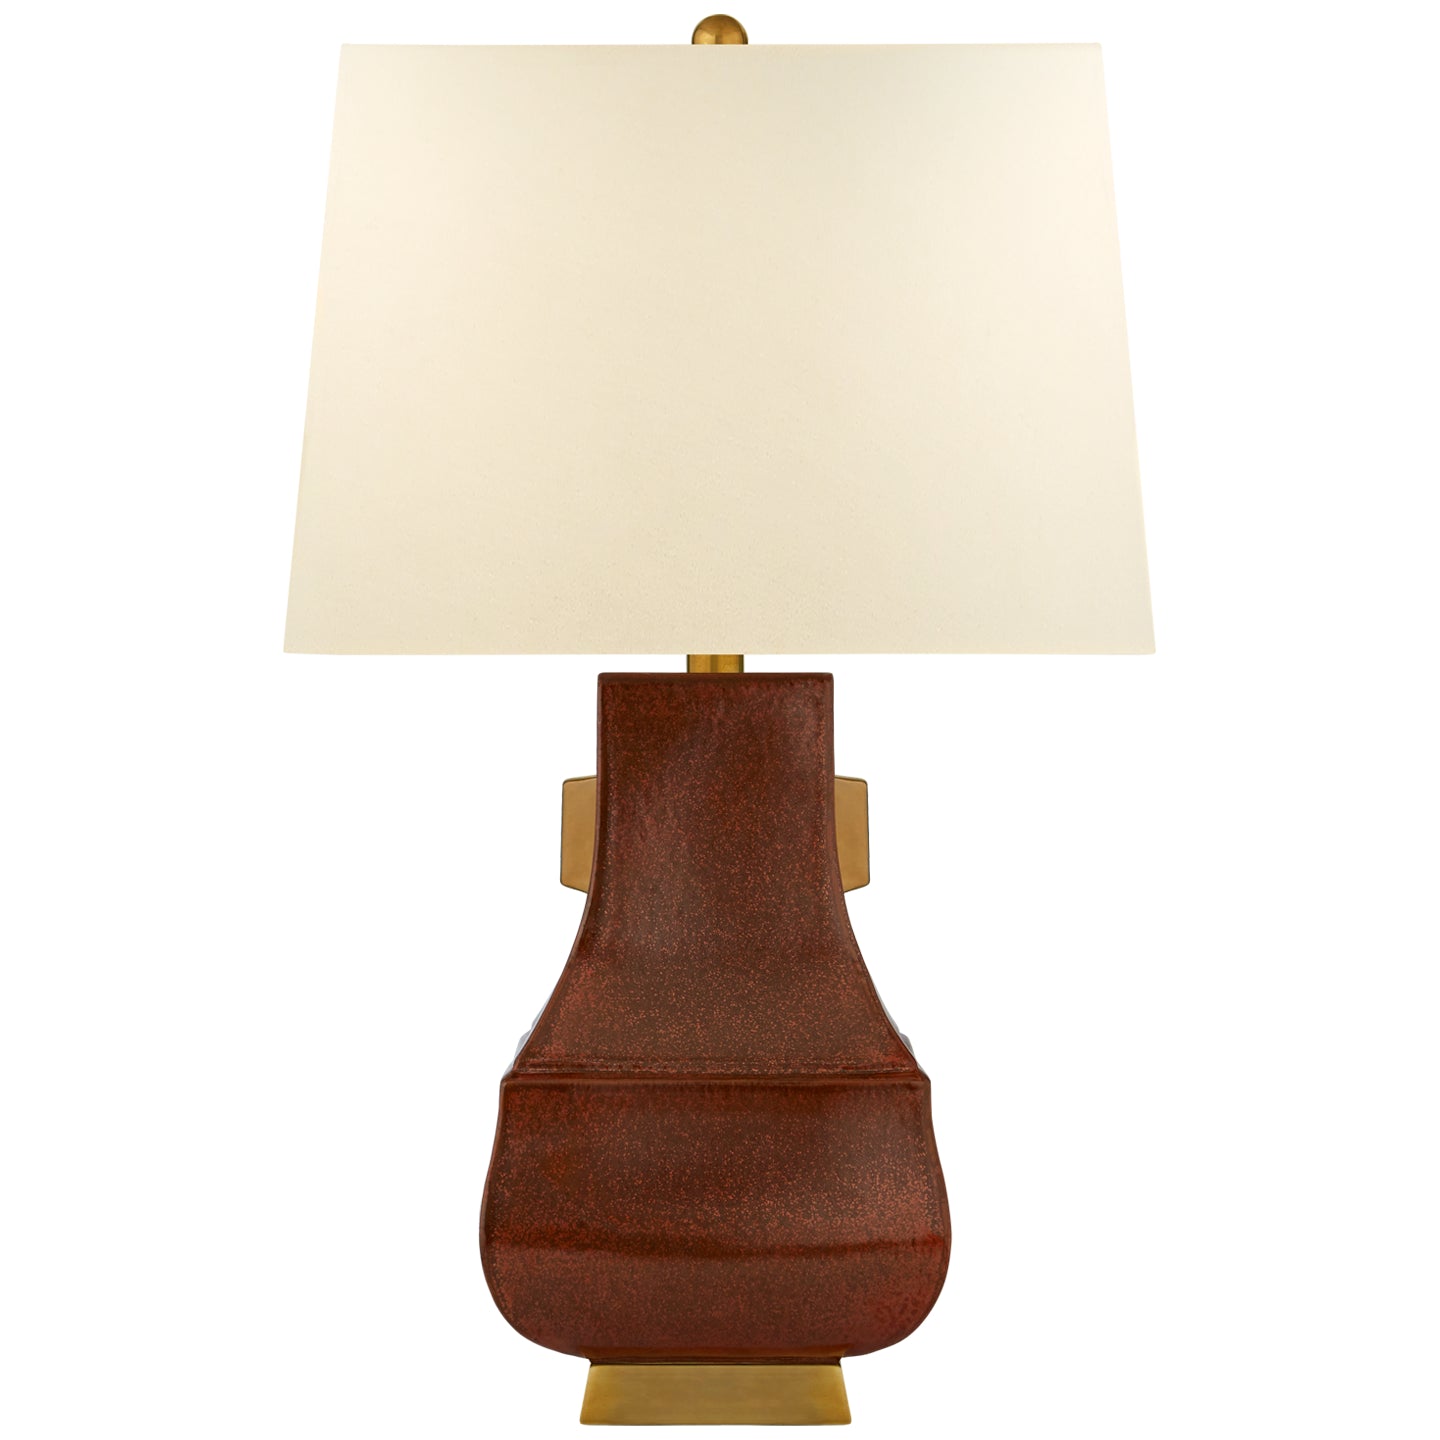 Visual Comfort Signature - CHA 8694ACO/BG-PL - One Light Table Lamp - Kang Jug - Autumn Copper with Burnt Gold